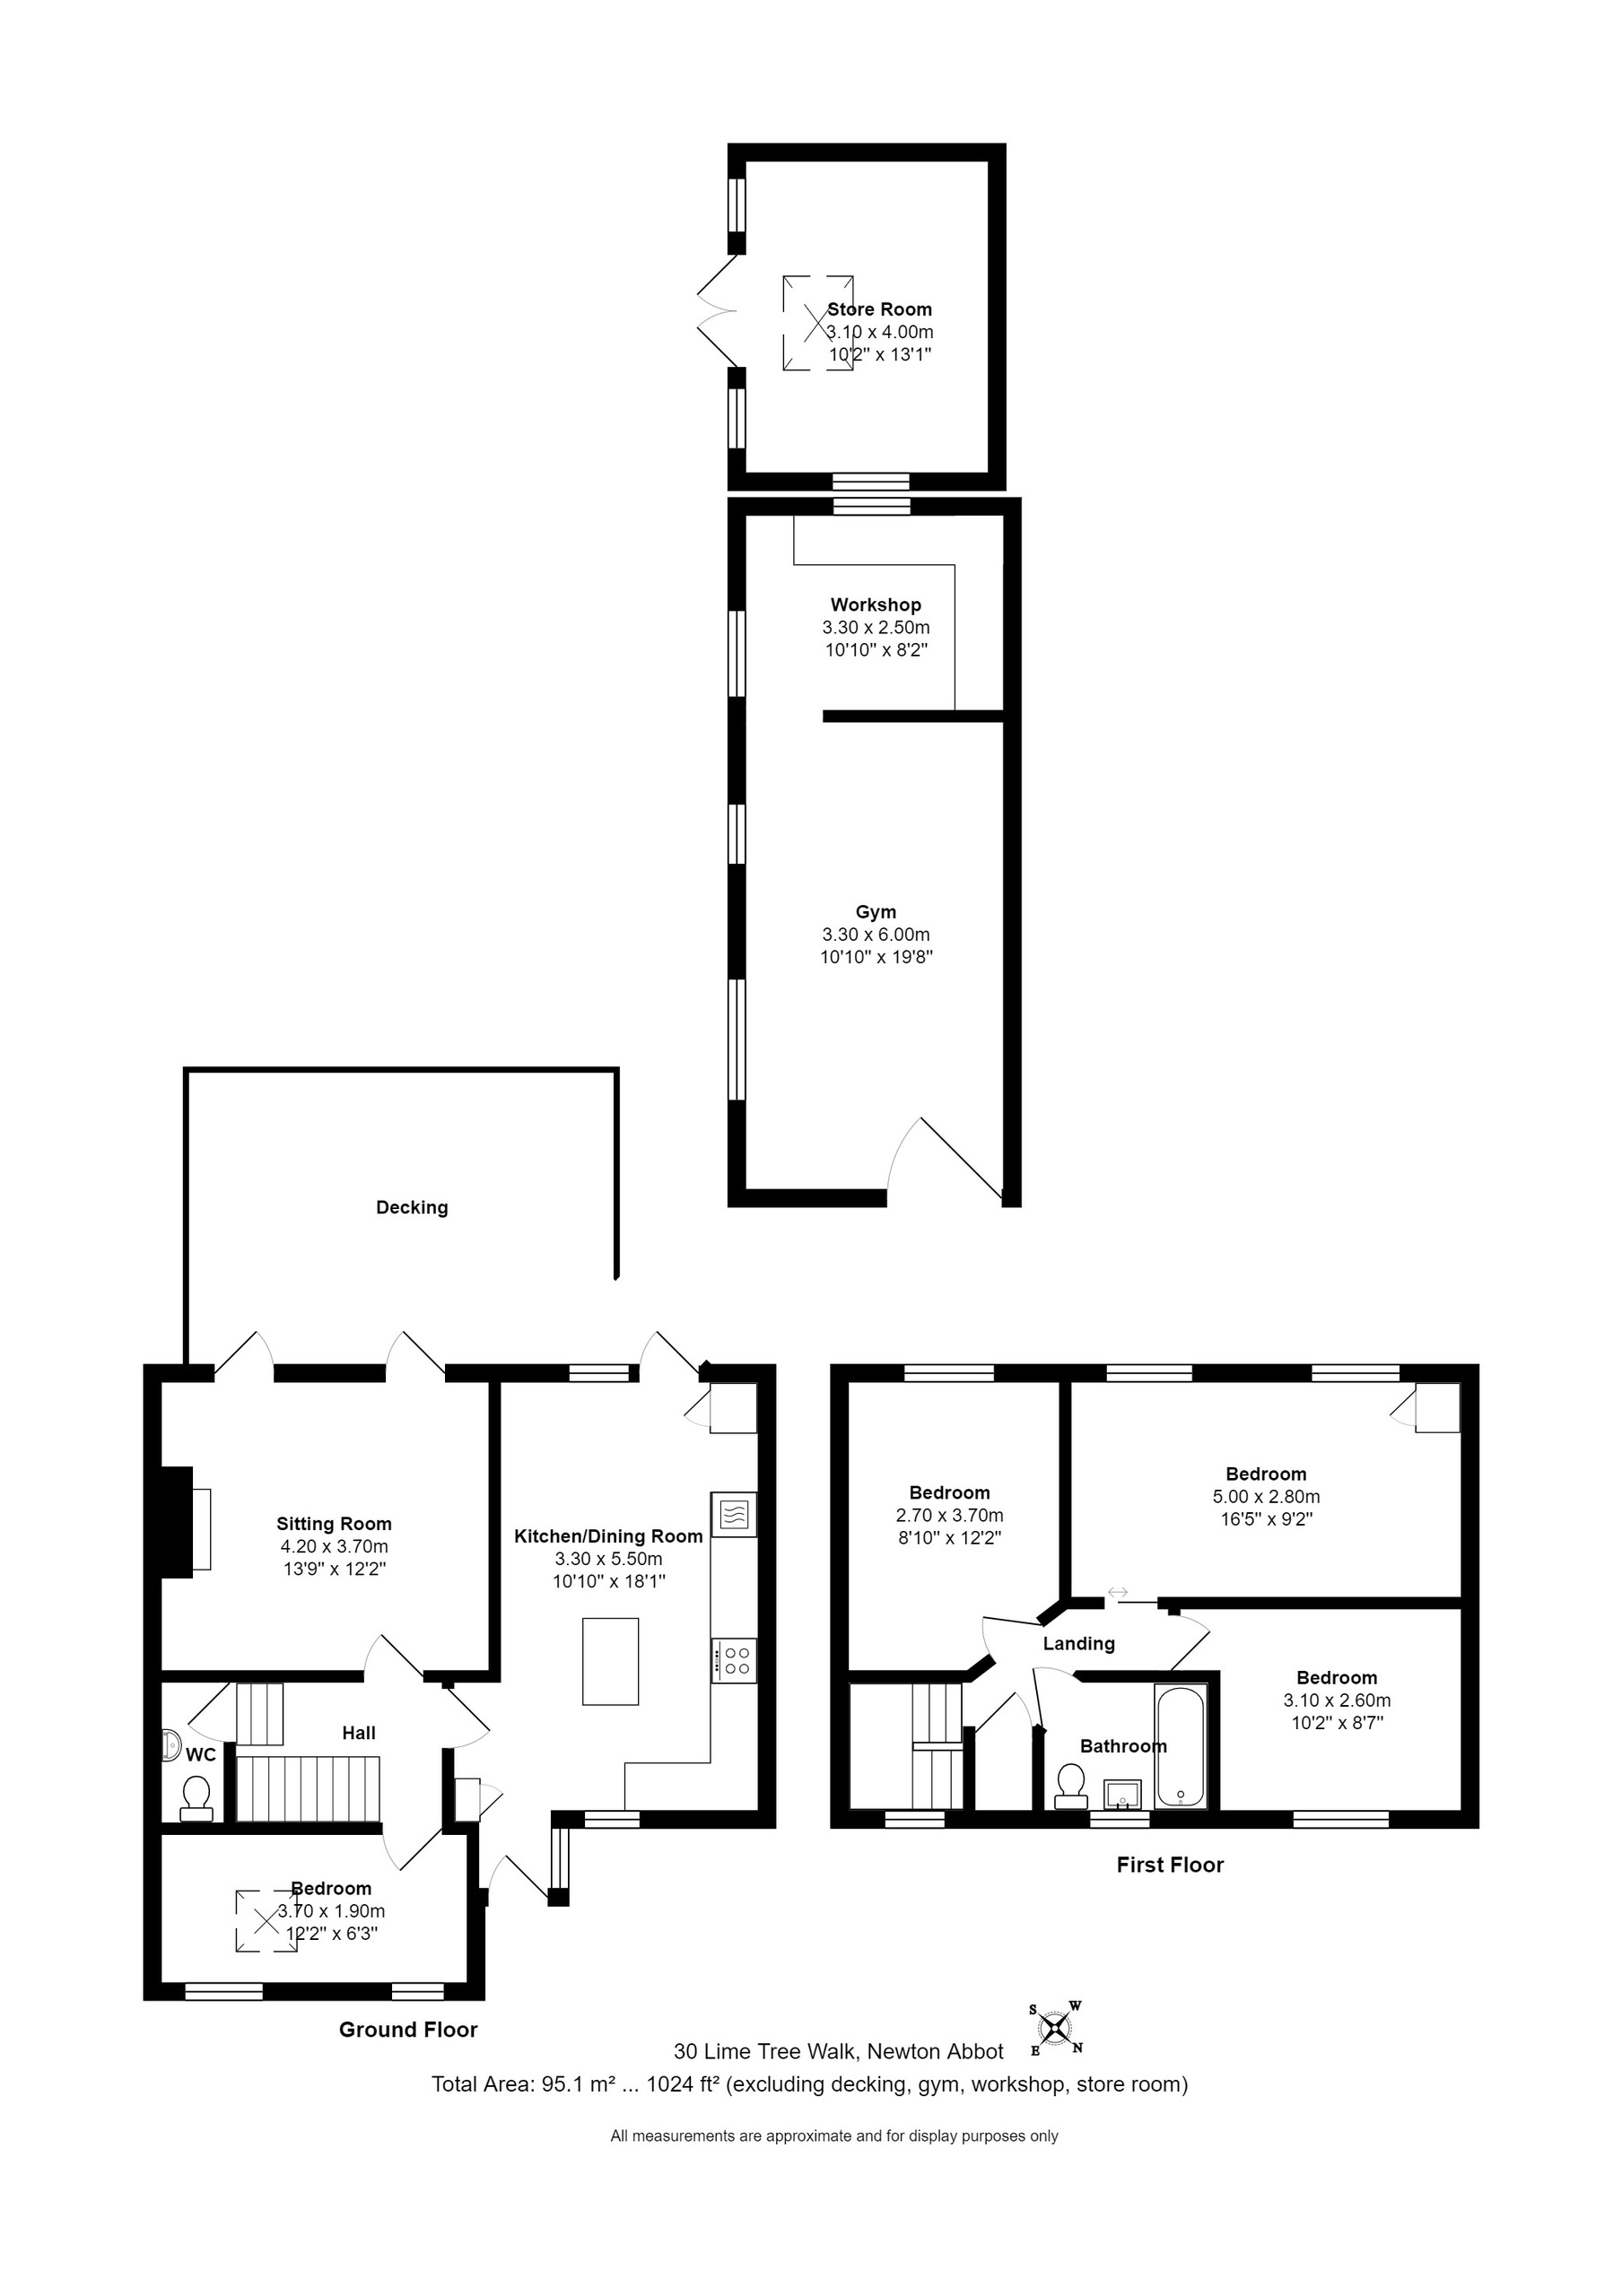 4 bed semi-detached house for sale in Milber, Newton Abbot - Property floorplan